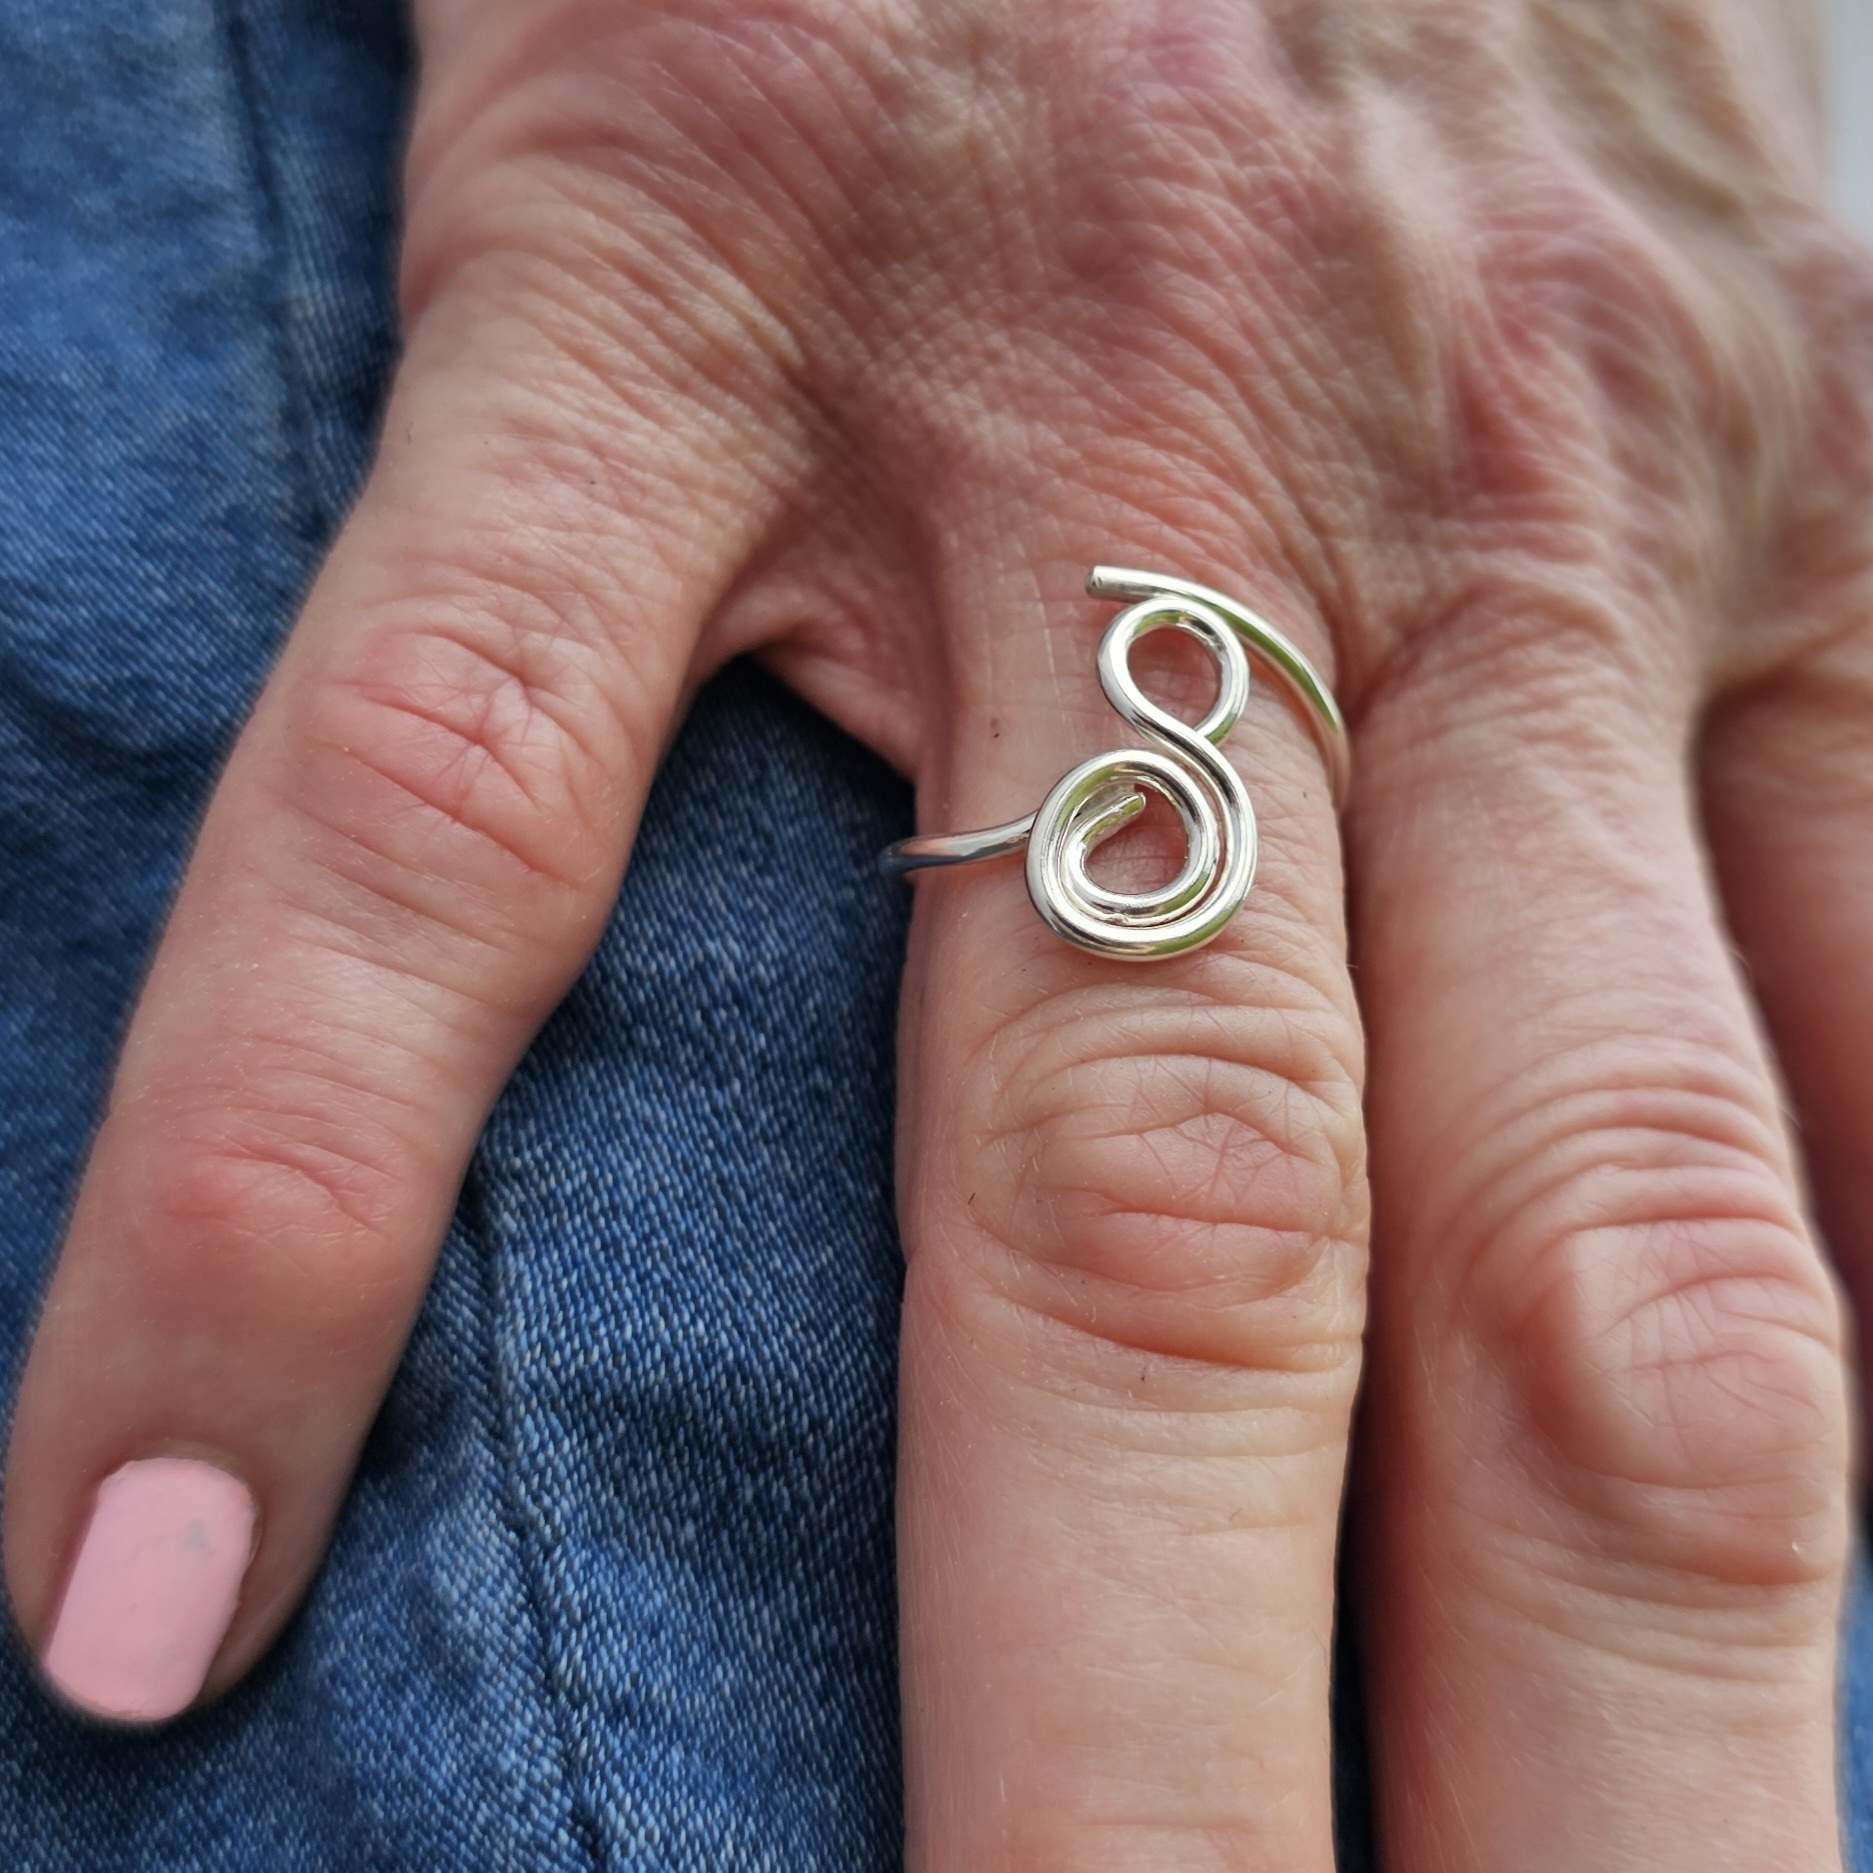 Silver adjustable gratitude ring worn on woman's index finger placed on jean pants.